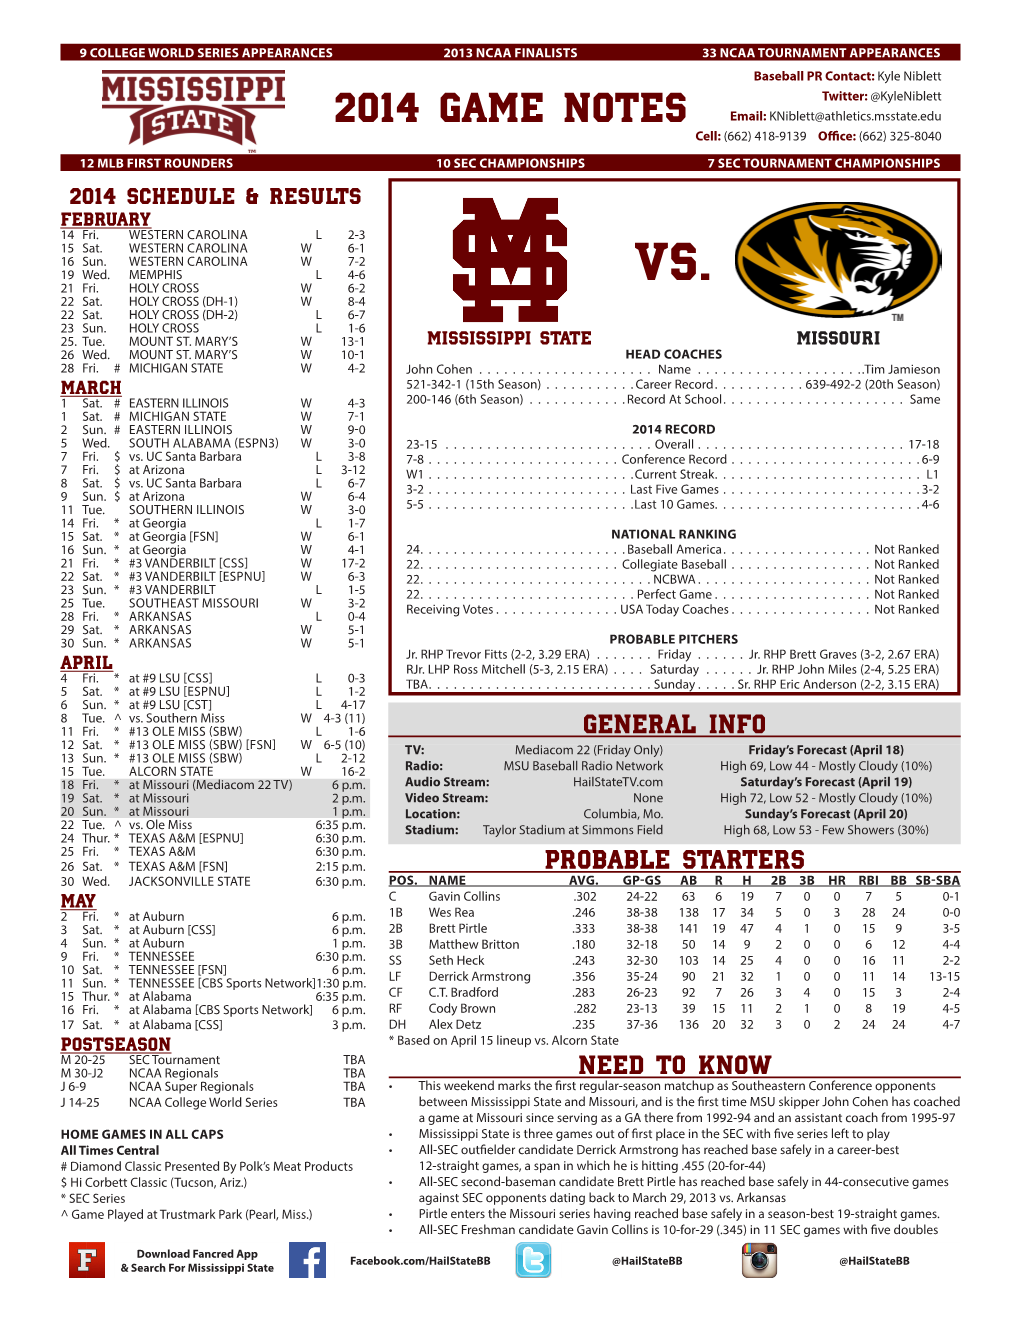 2014 GAME NOTES Email: Kniblett@Athletics.Msstate.Edu Cell: (662) 418-9139 Office:(662) 325-8040